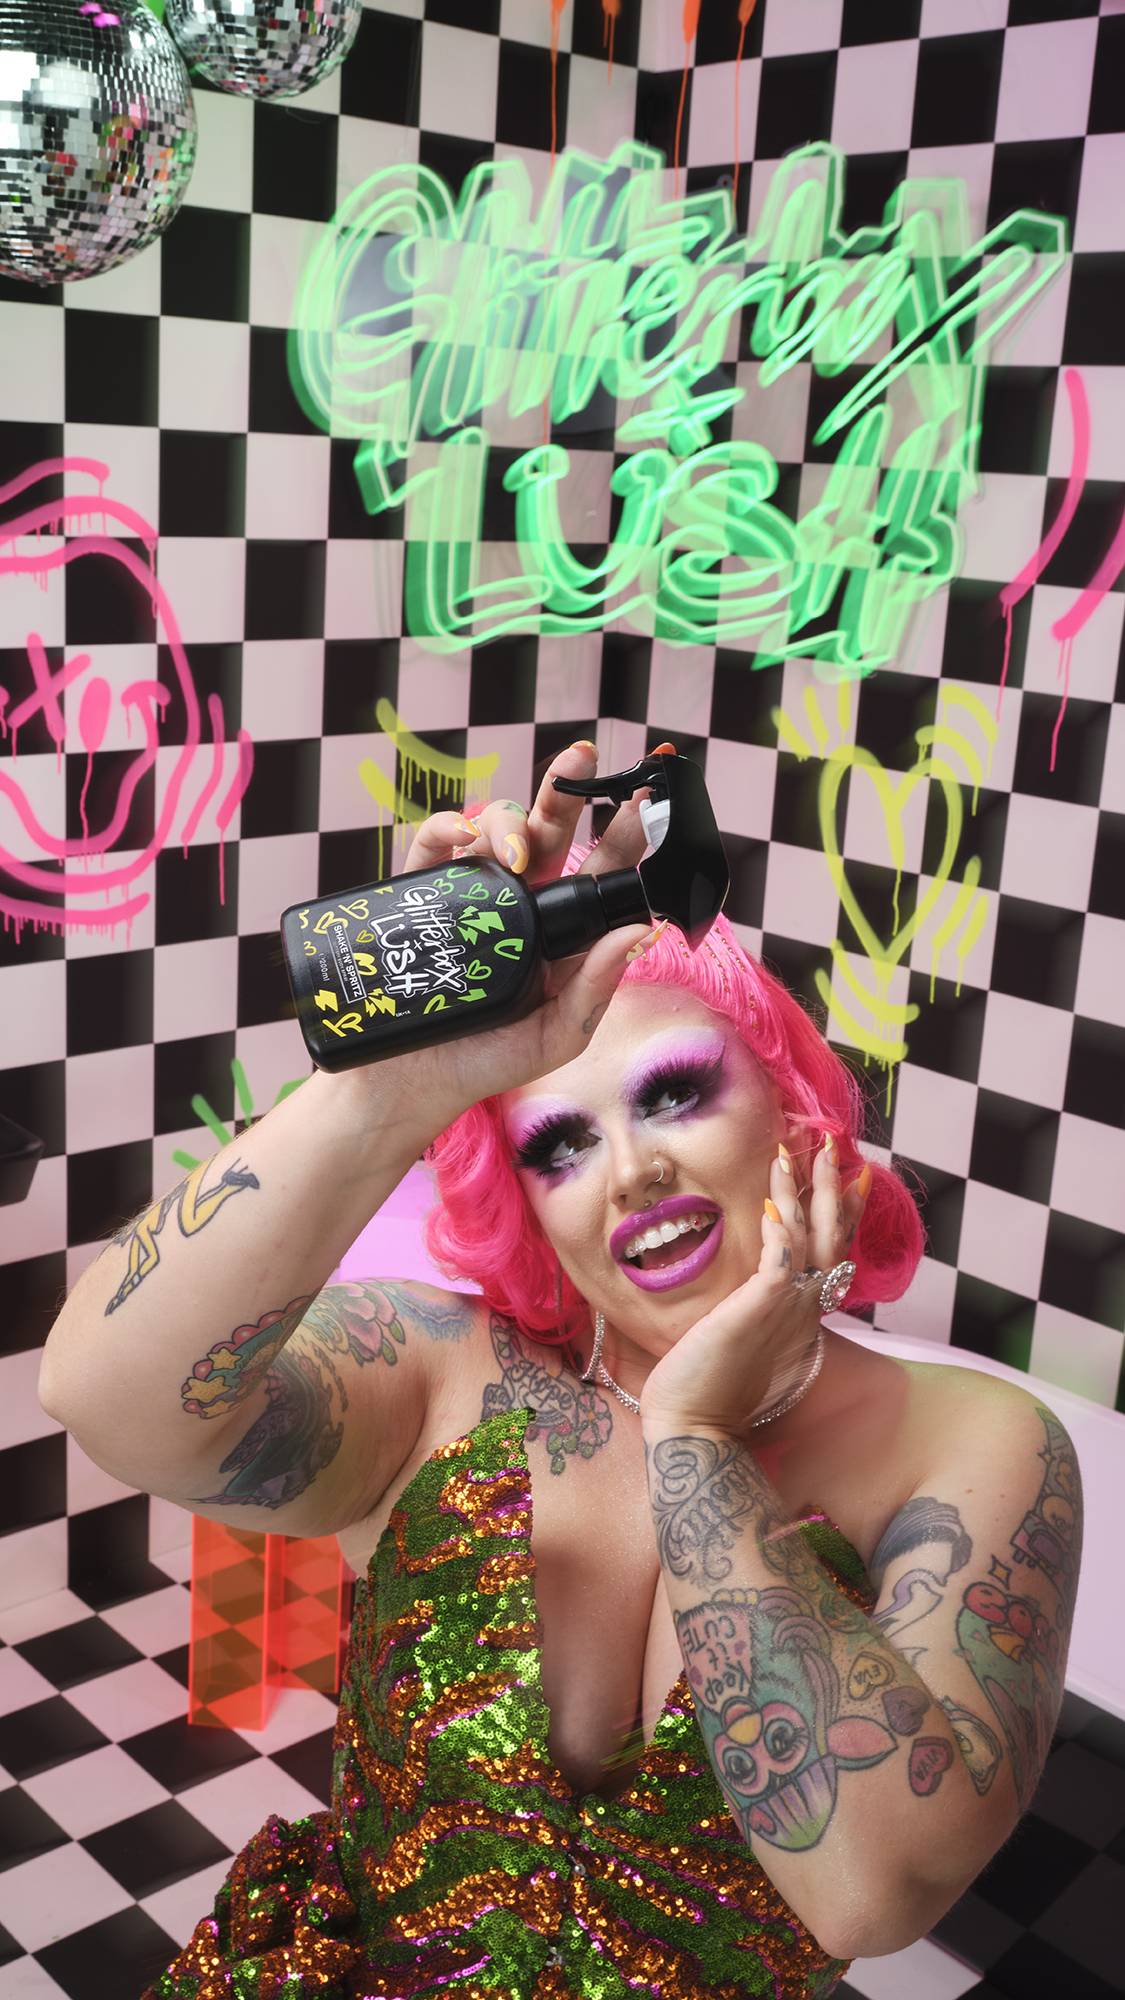 Model has pink hair and a sequin dress holding the spray bottle. They are in a checkerboard room with neon signs and graffiti.